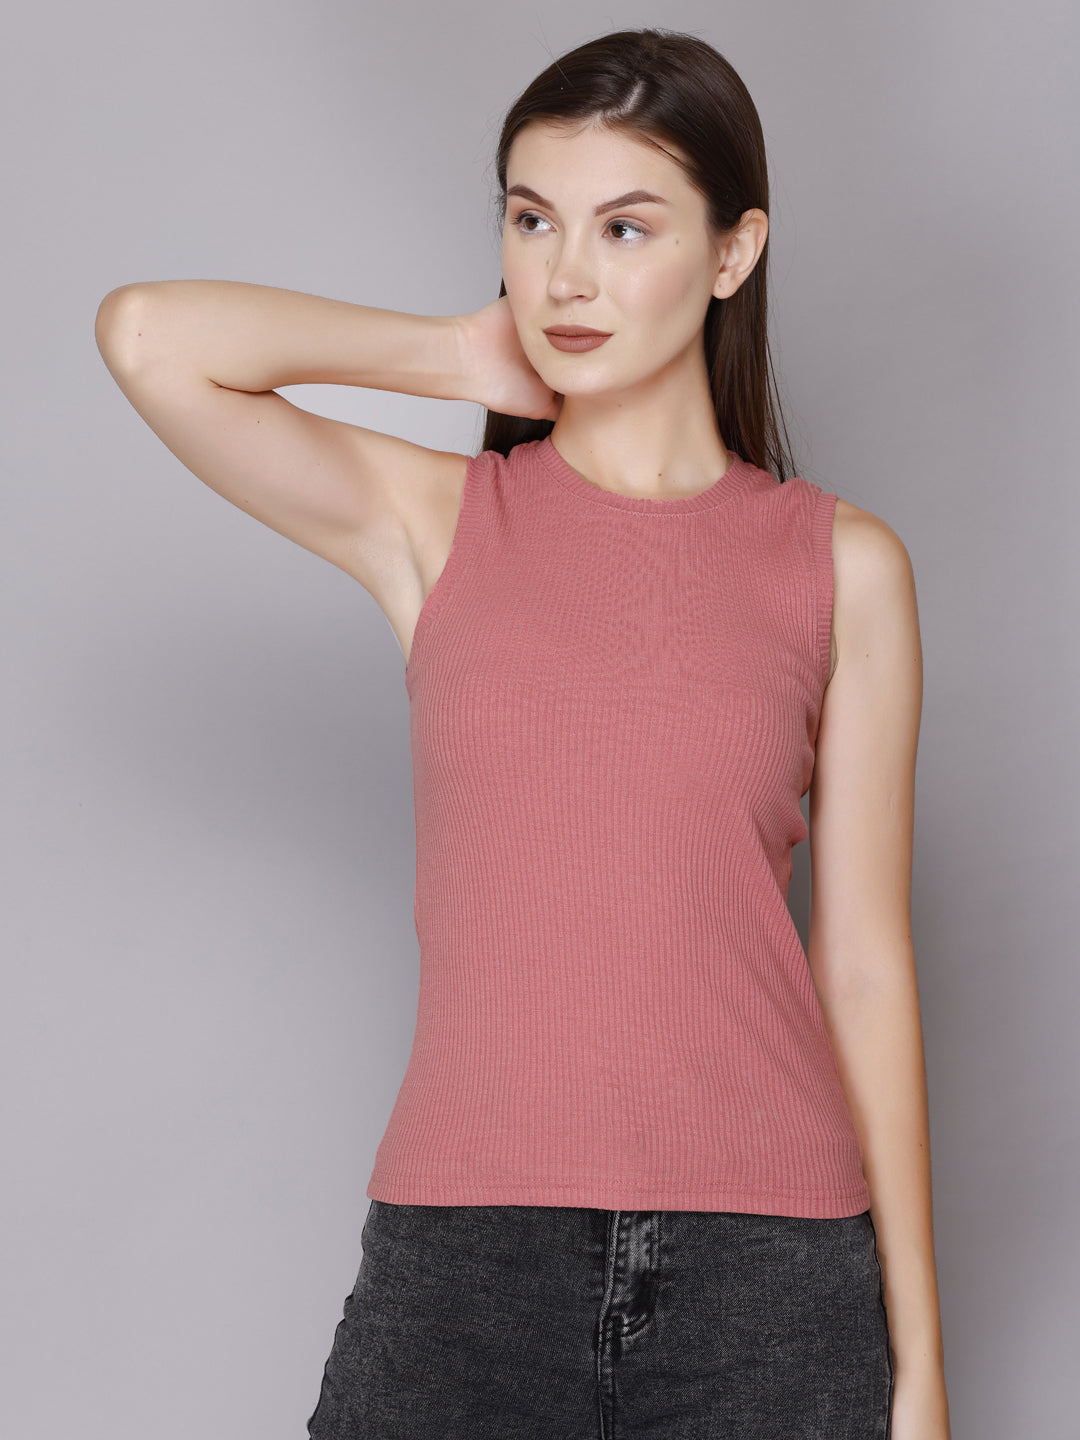 Buy Stylish Sleeveless Tops At Best Prices Online In India